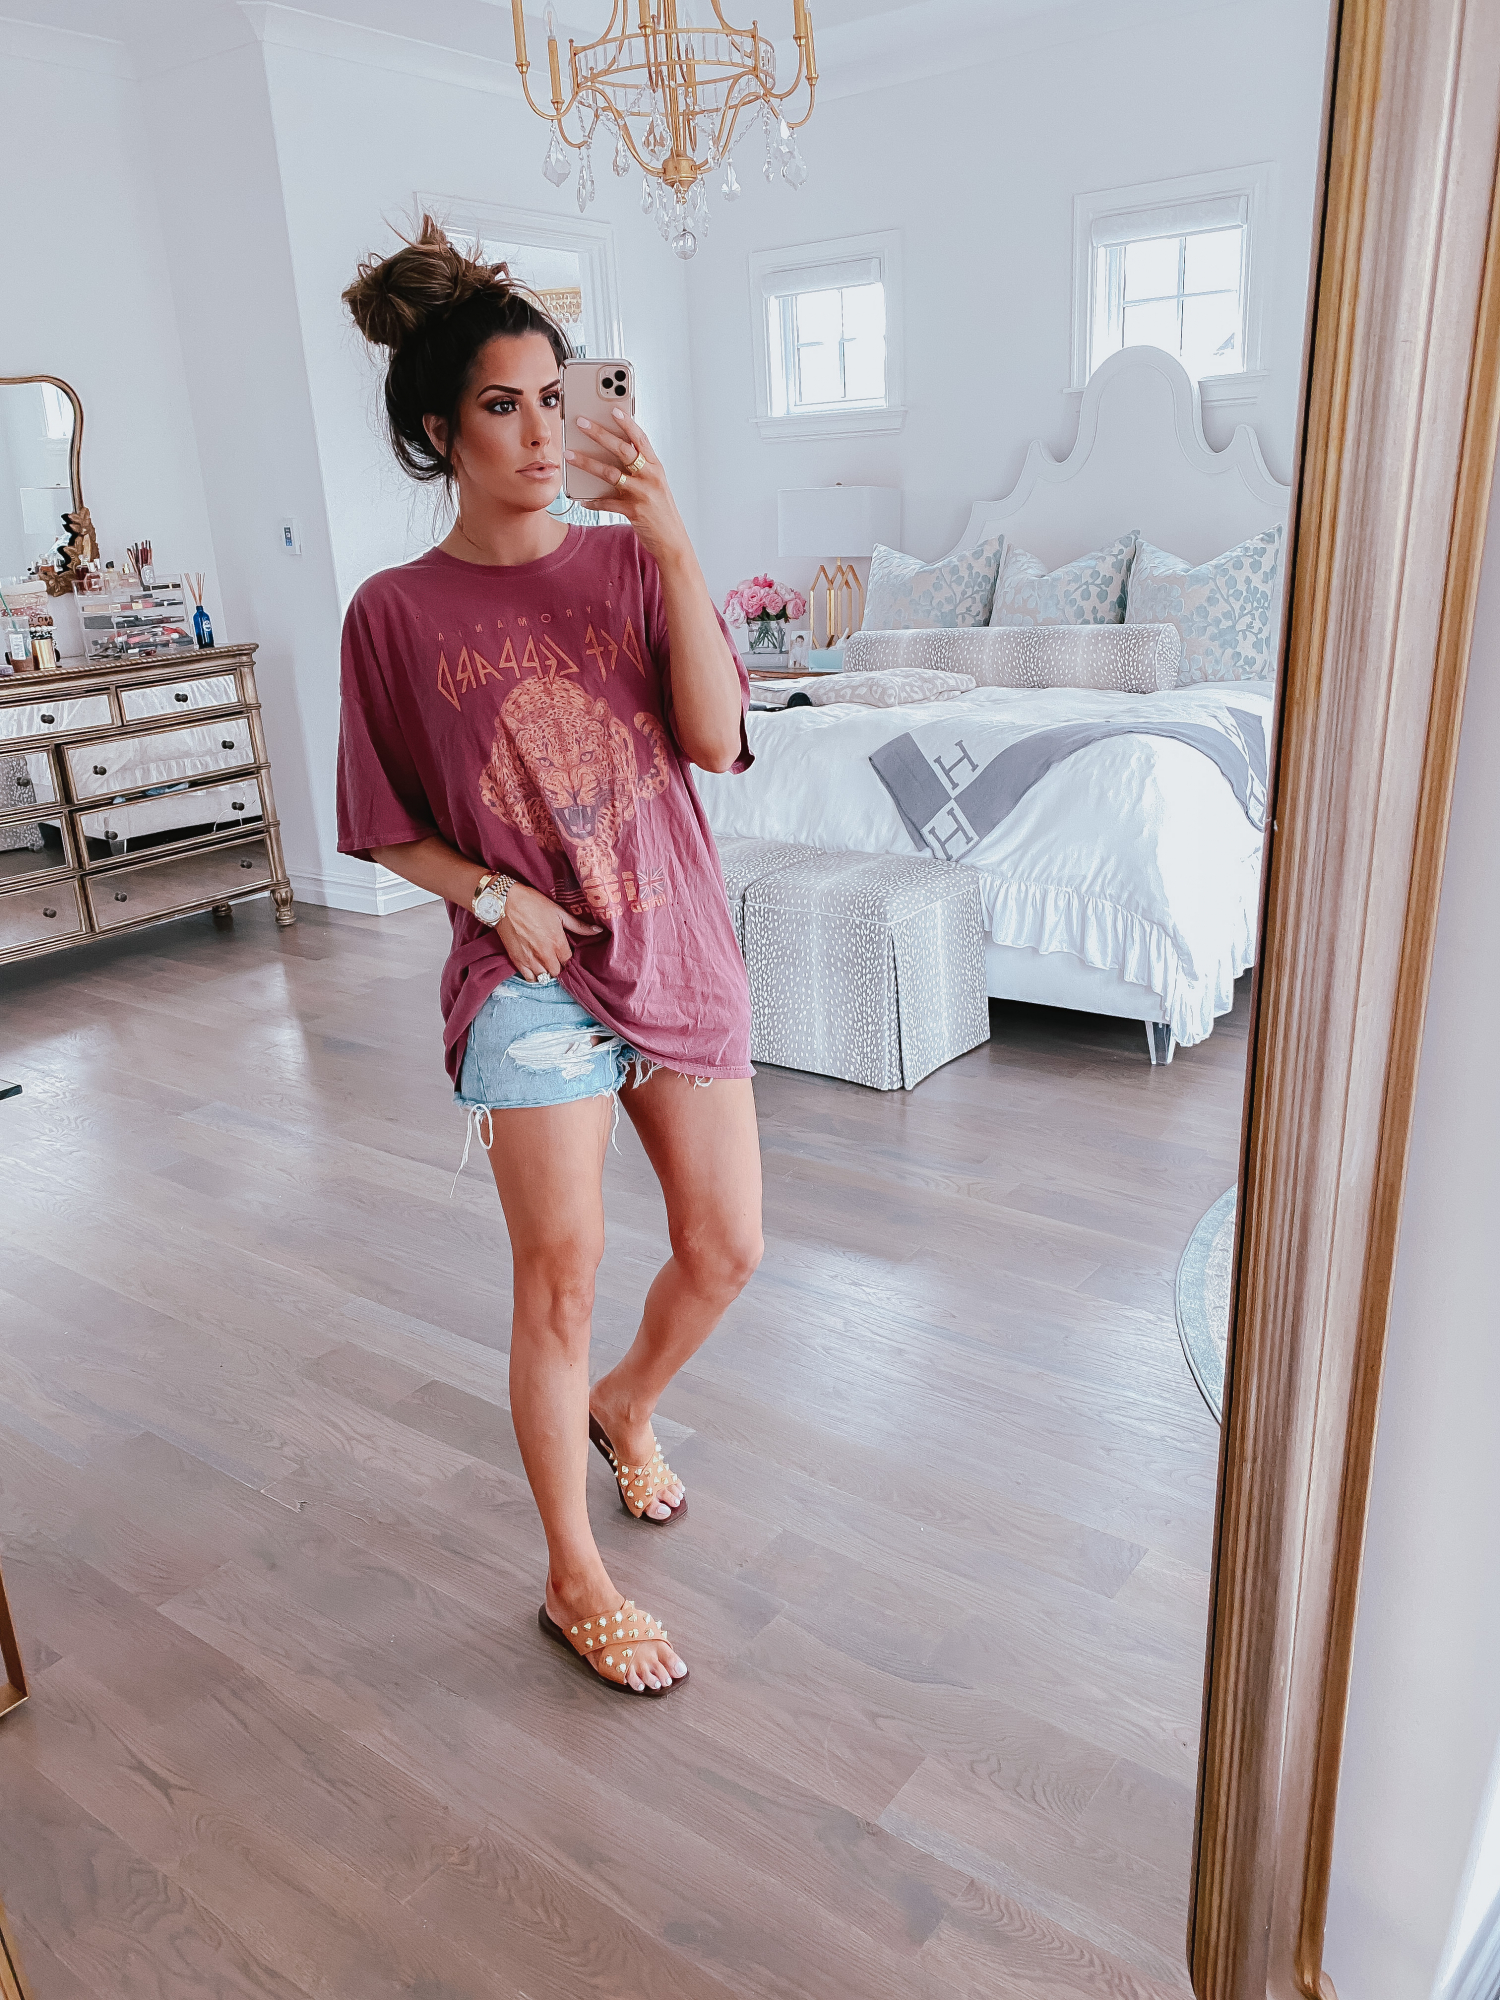 Oversized Vintage Band Tee styled by top US fashion blog, The Sweetest Thing